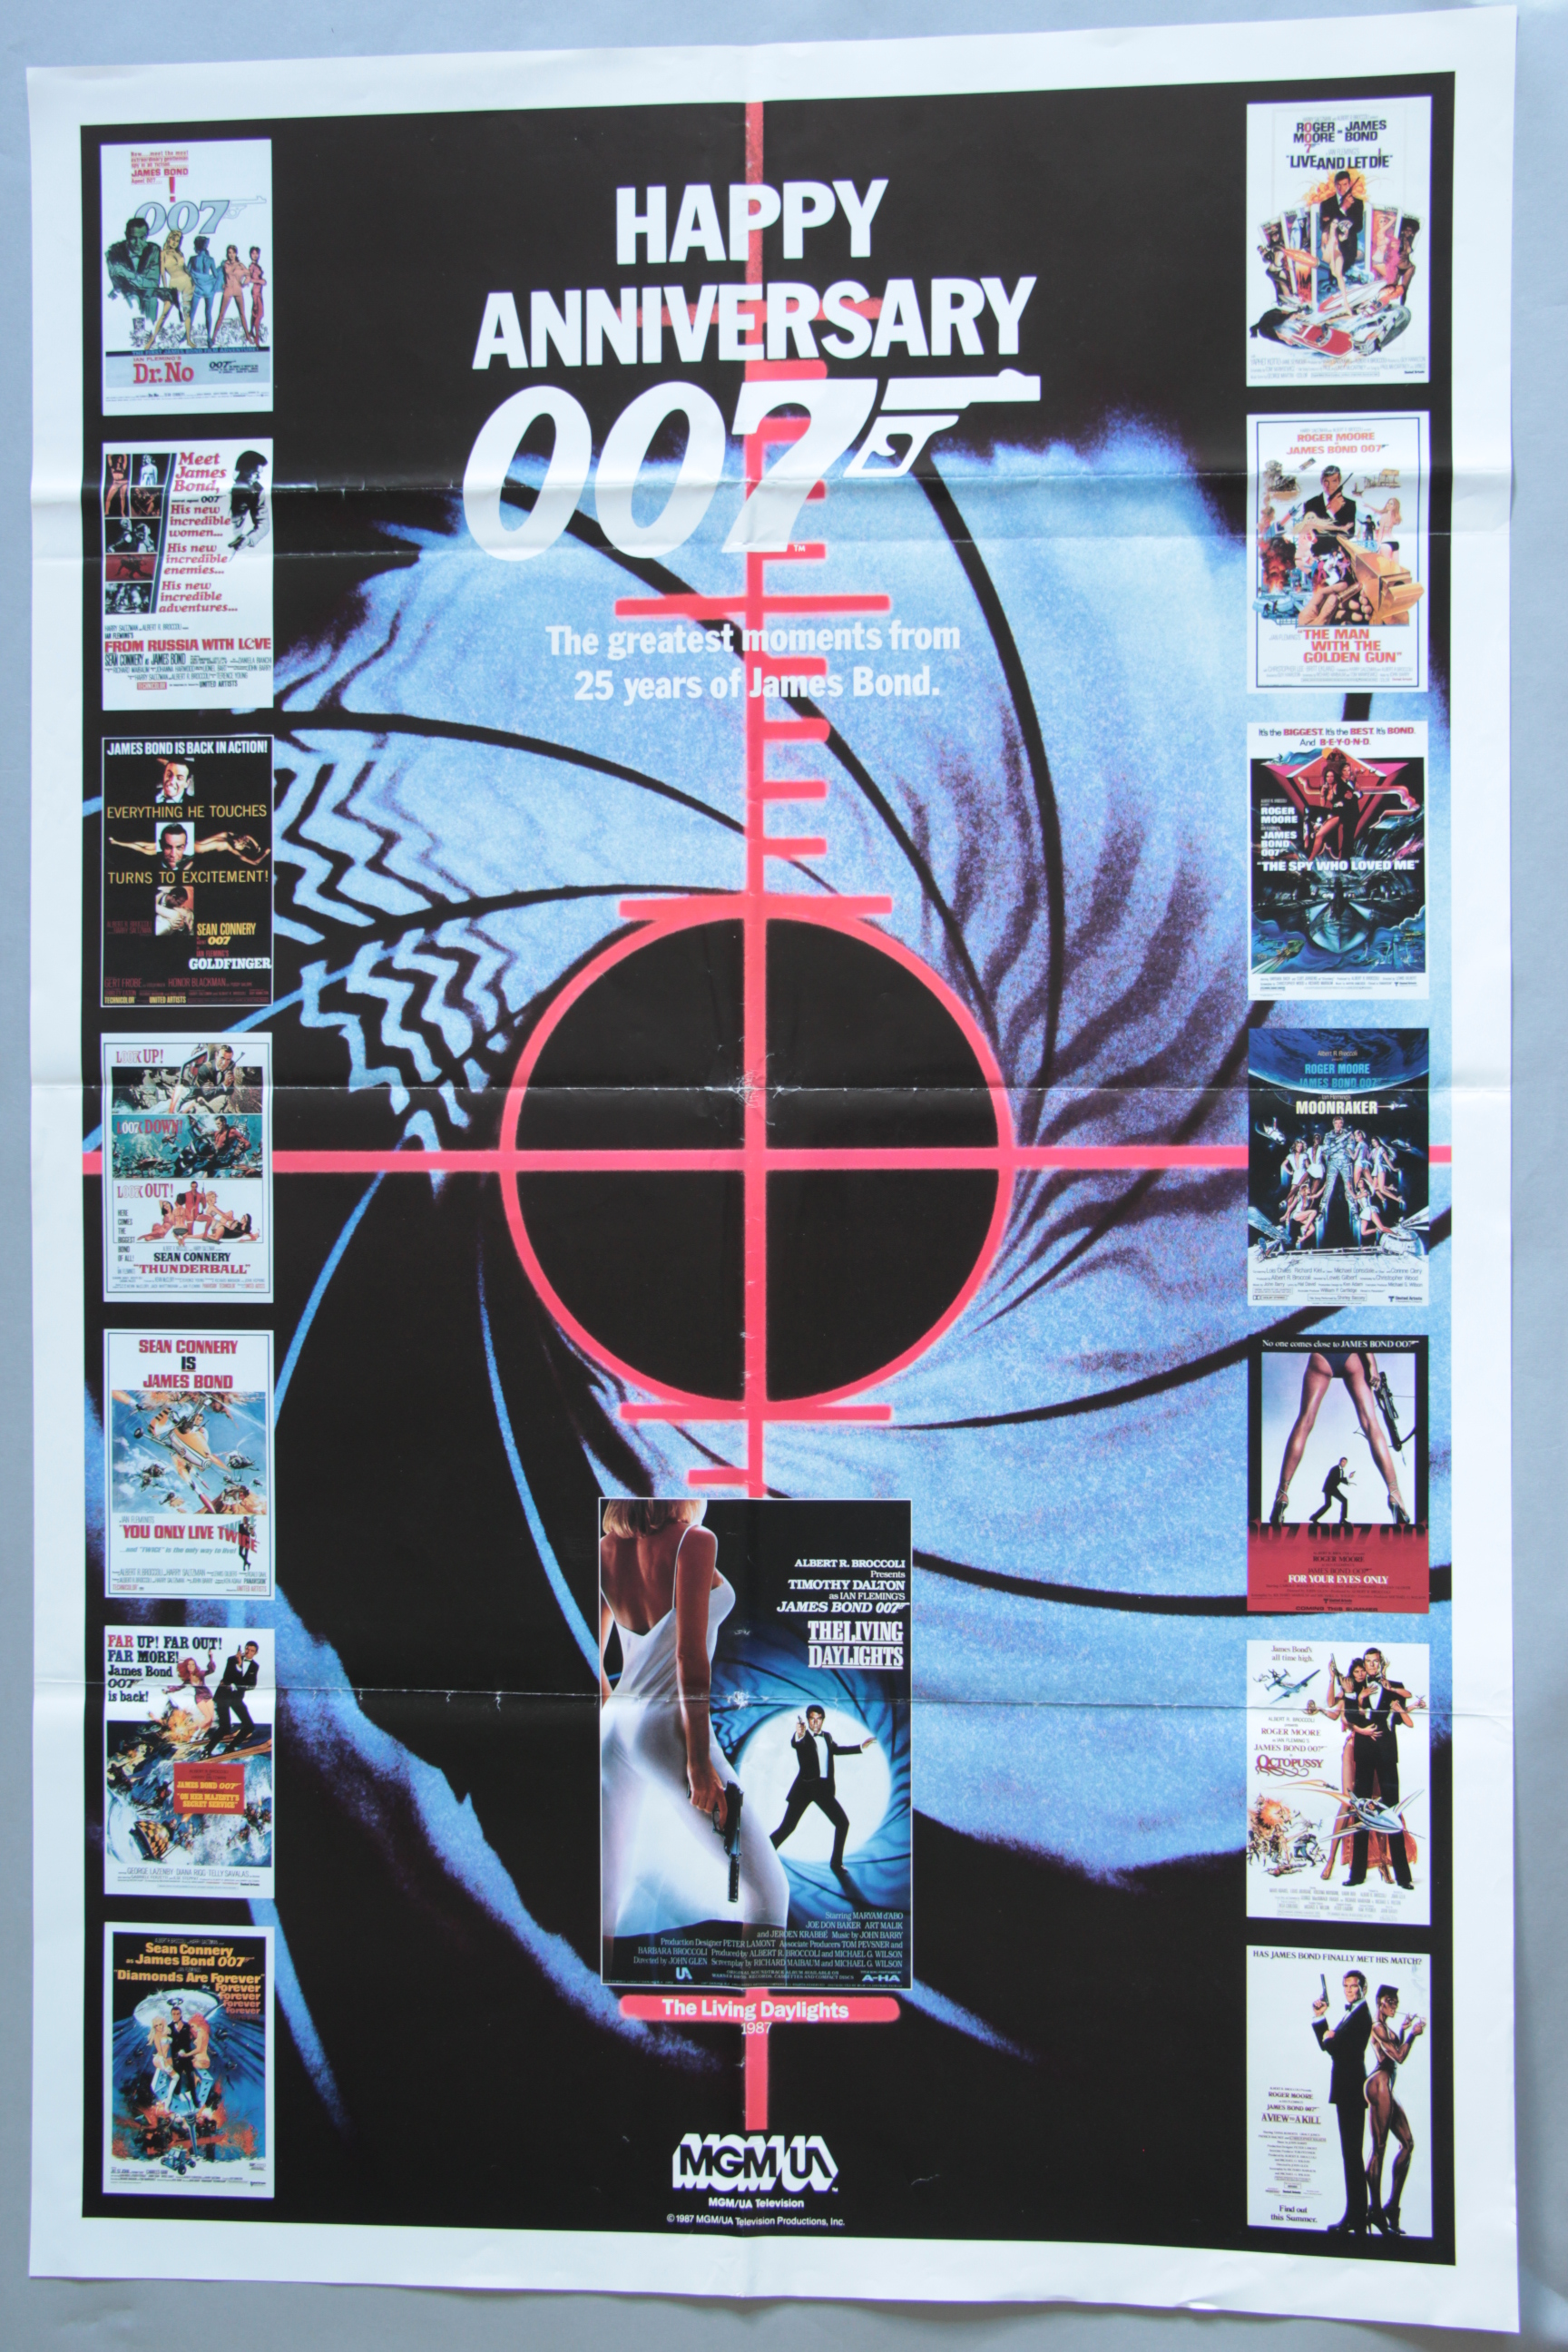 James Bond 25th Anniversary folded film poster 27 x 41 inch featuring art from all the James Bond